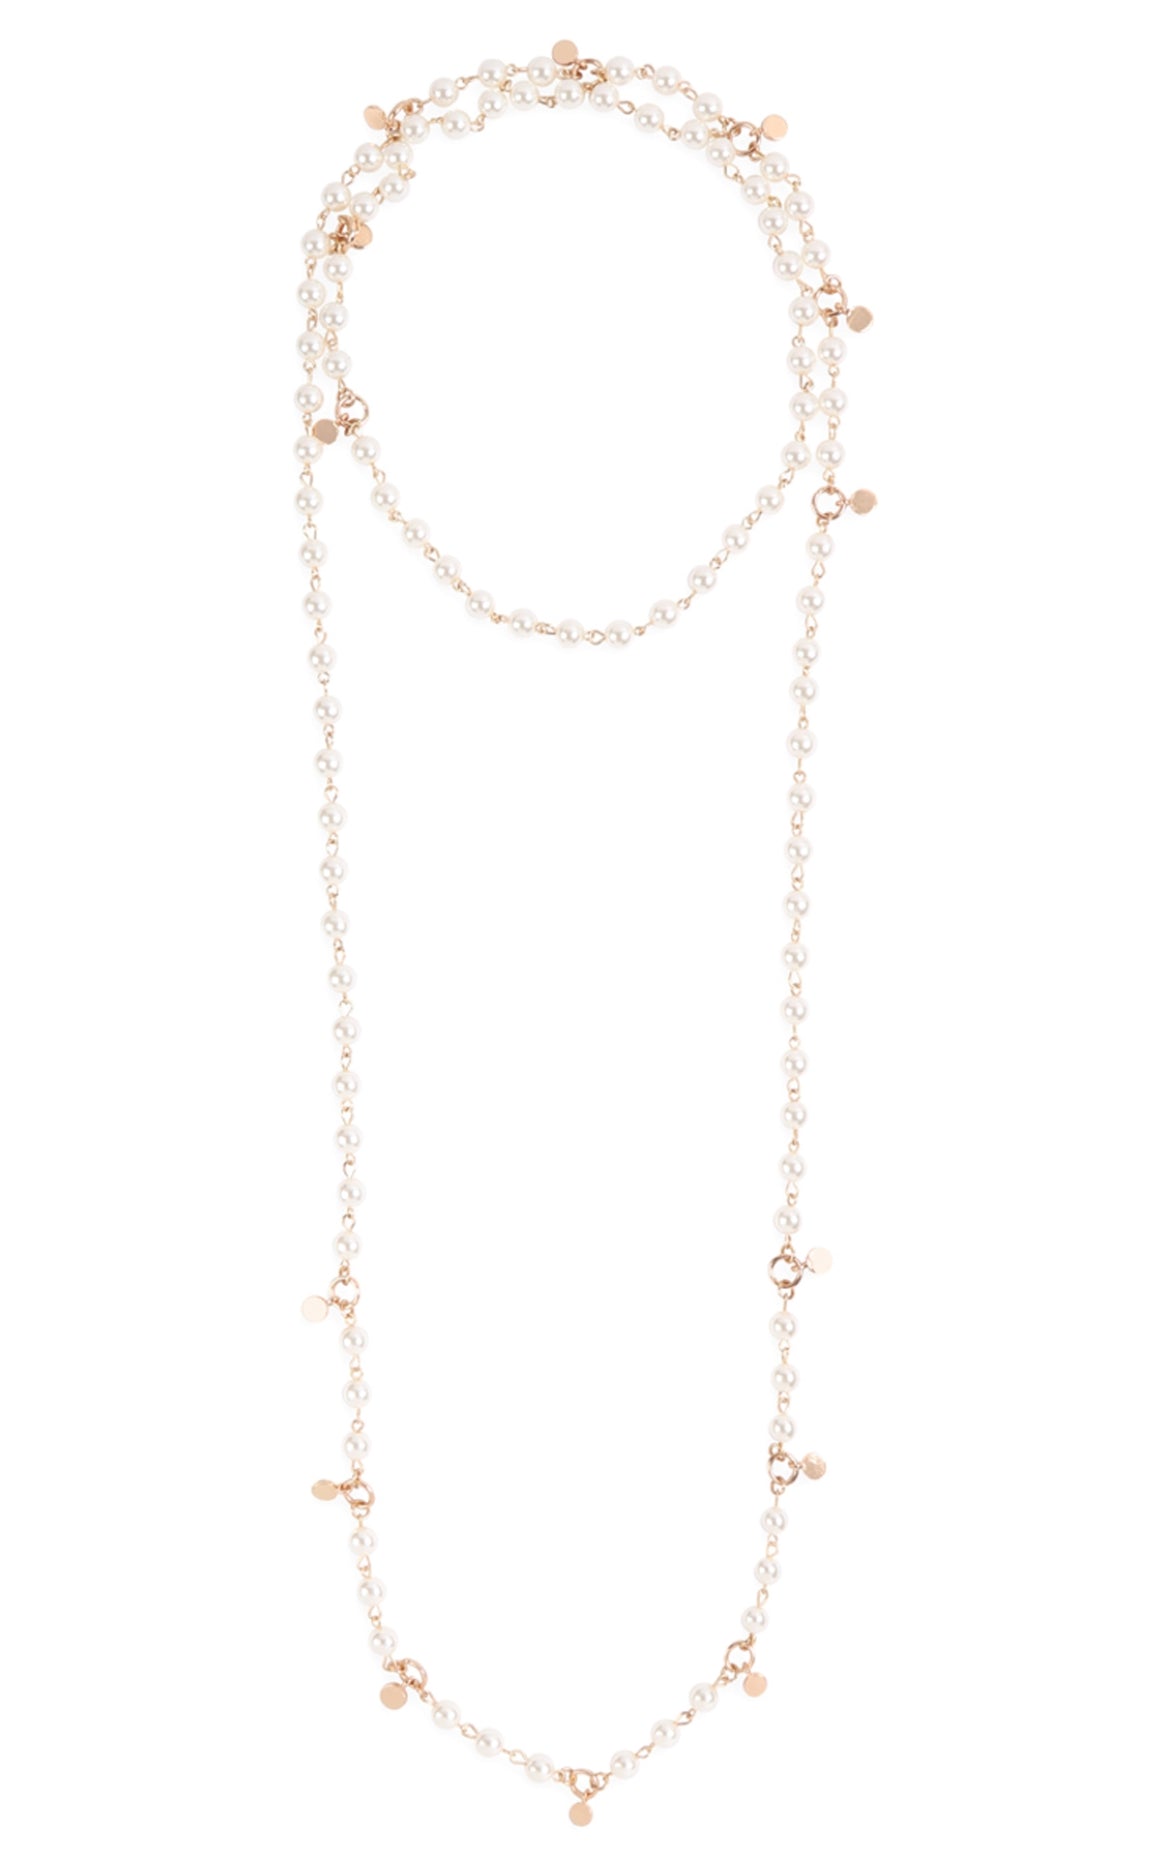 The Pandra Long Double Pearl Necklace